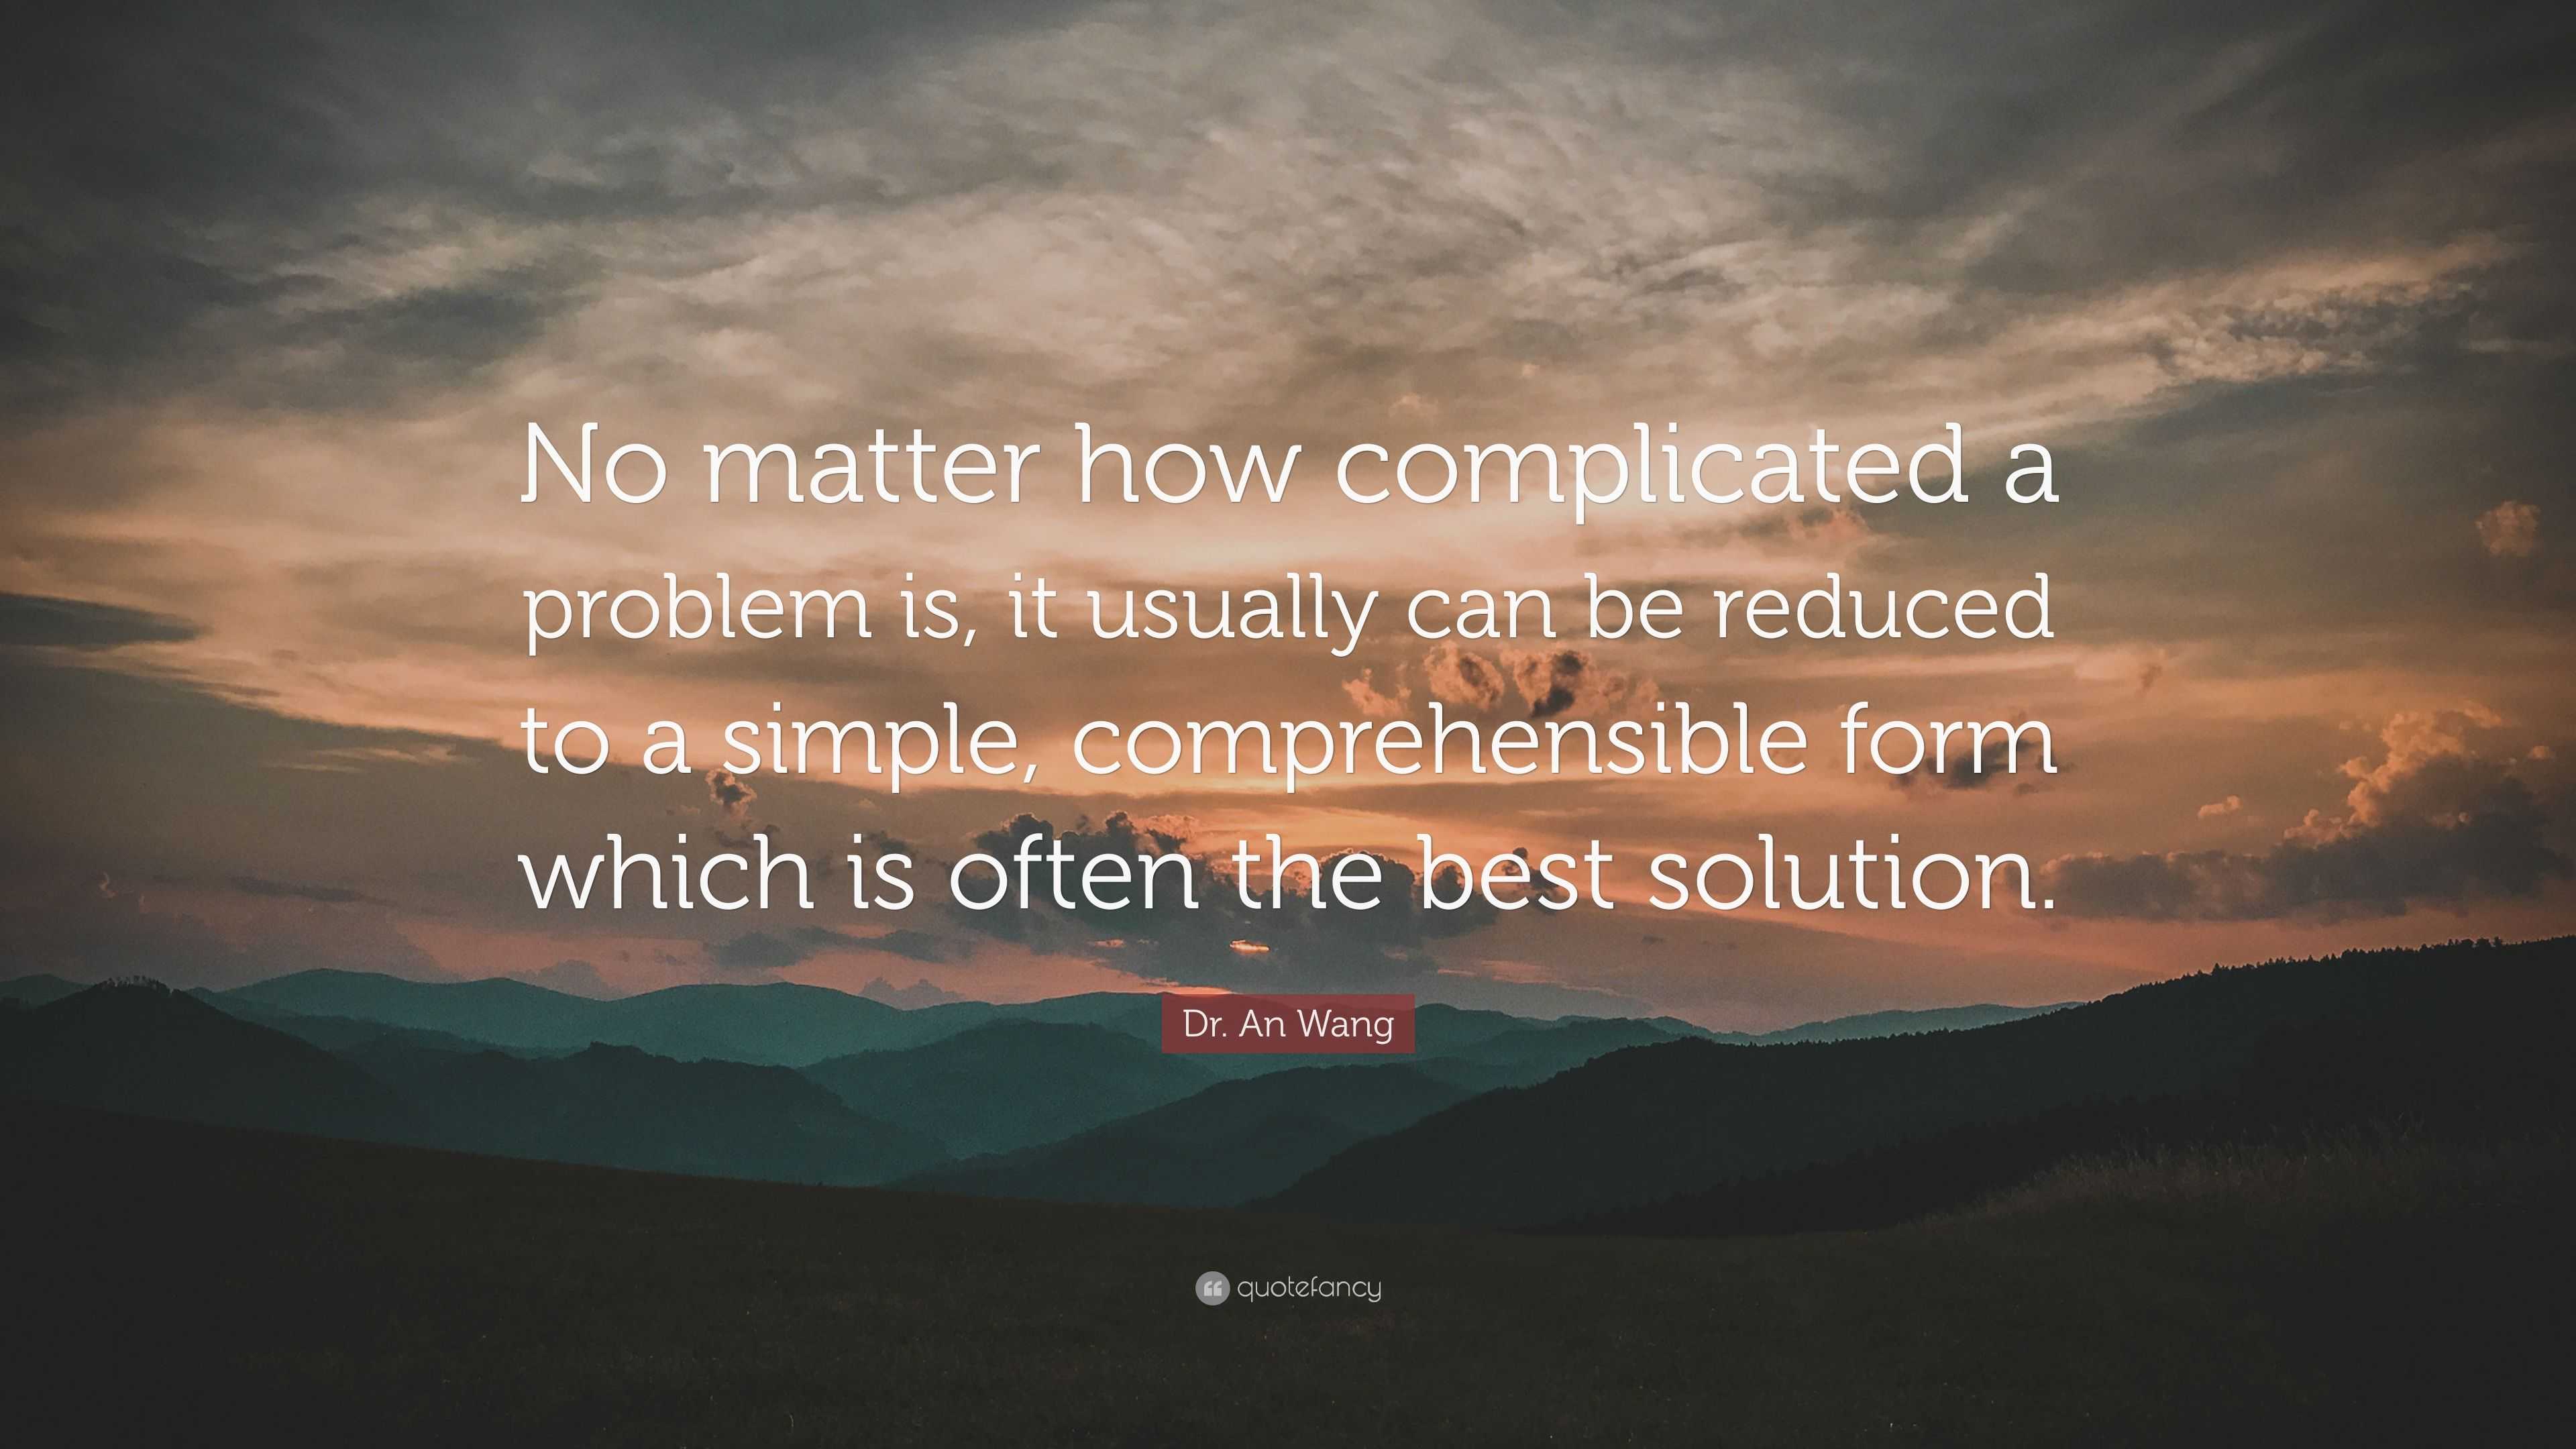 Dr. An Wang Quote: “No matter how complicated a problem is, it usually ...